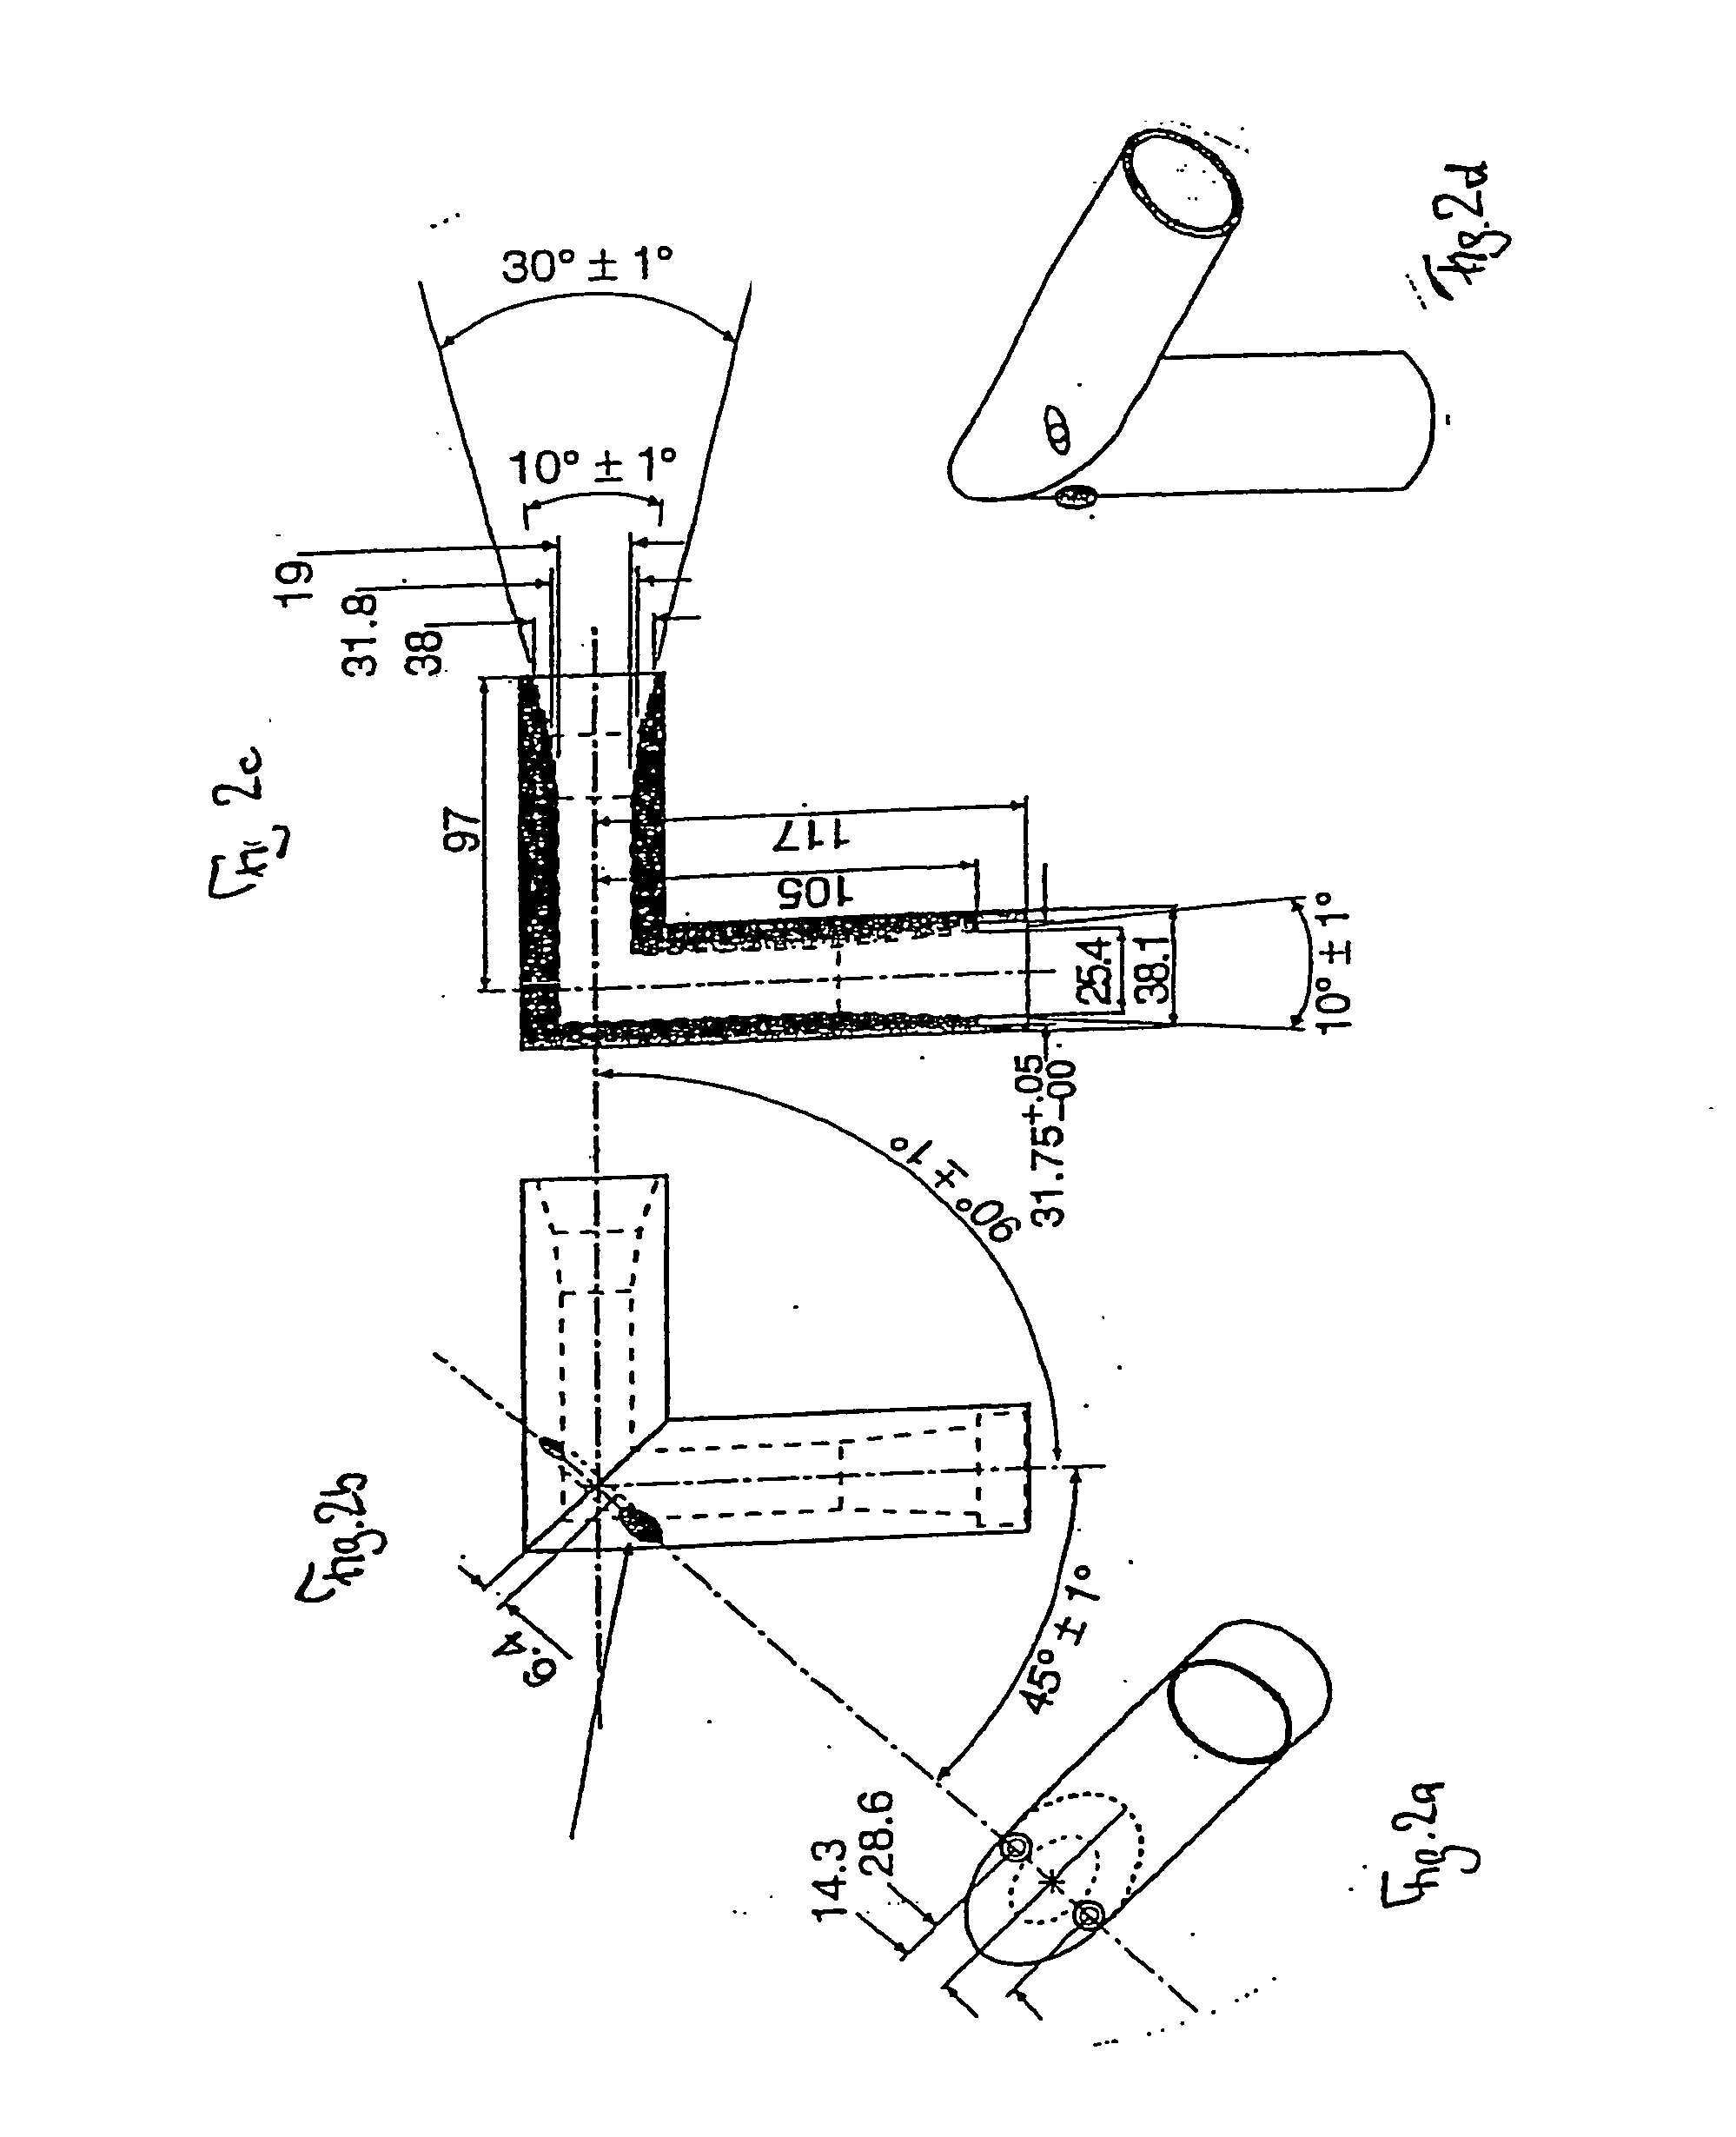 Process for determining the particle size distribution of an aerosol and apparatus for carrying out such a process